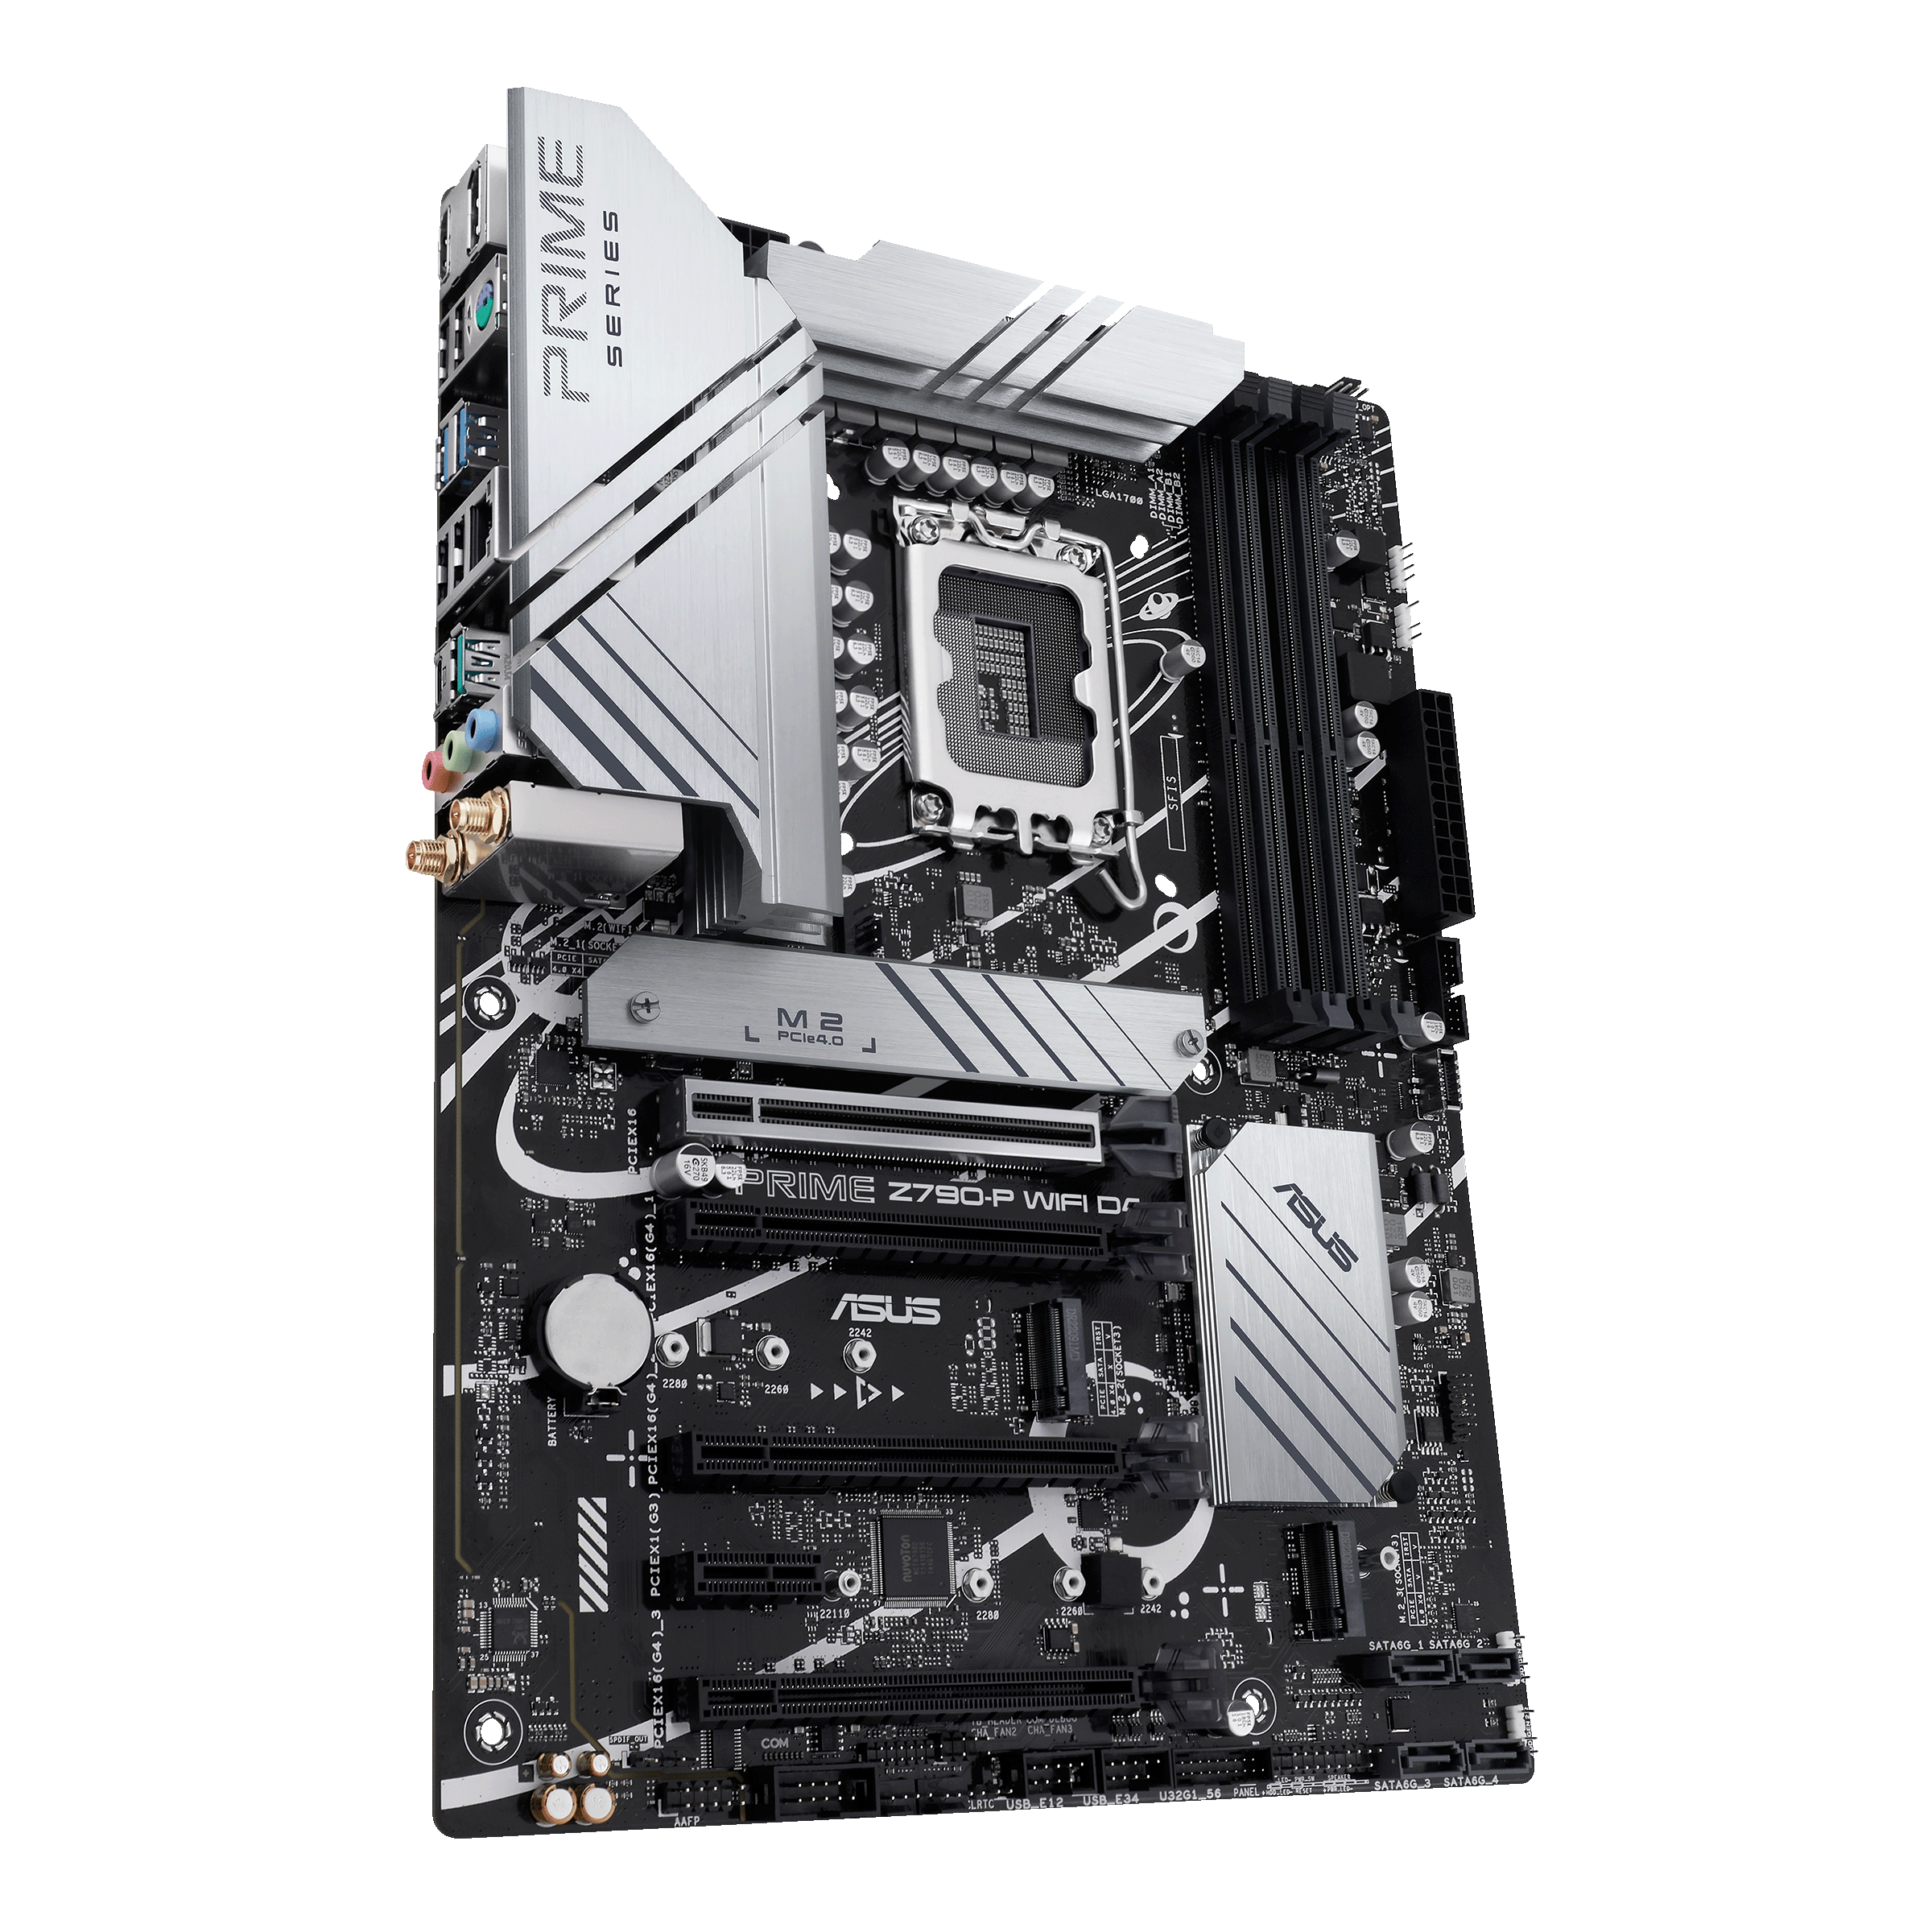 The PRIME Z790-P WIFI D4-CSM motherboard features Aura Sync. 